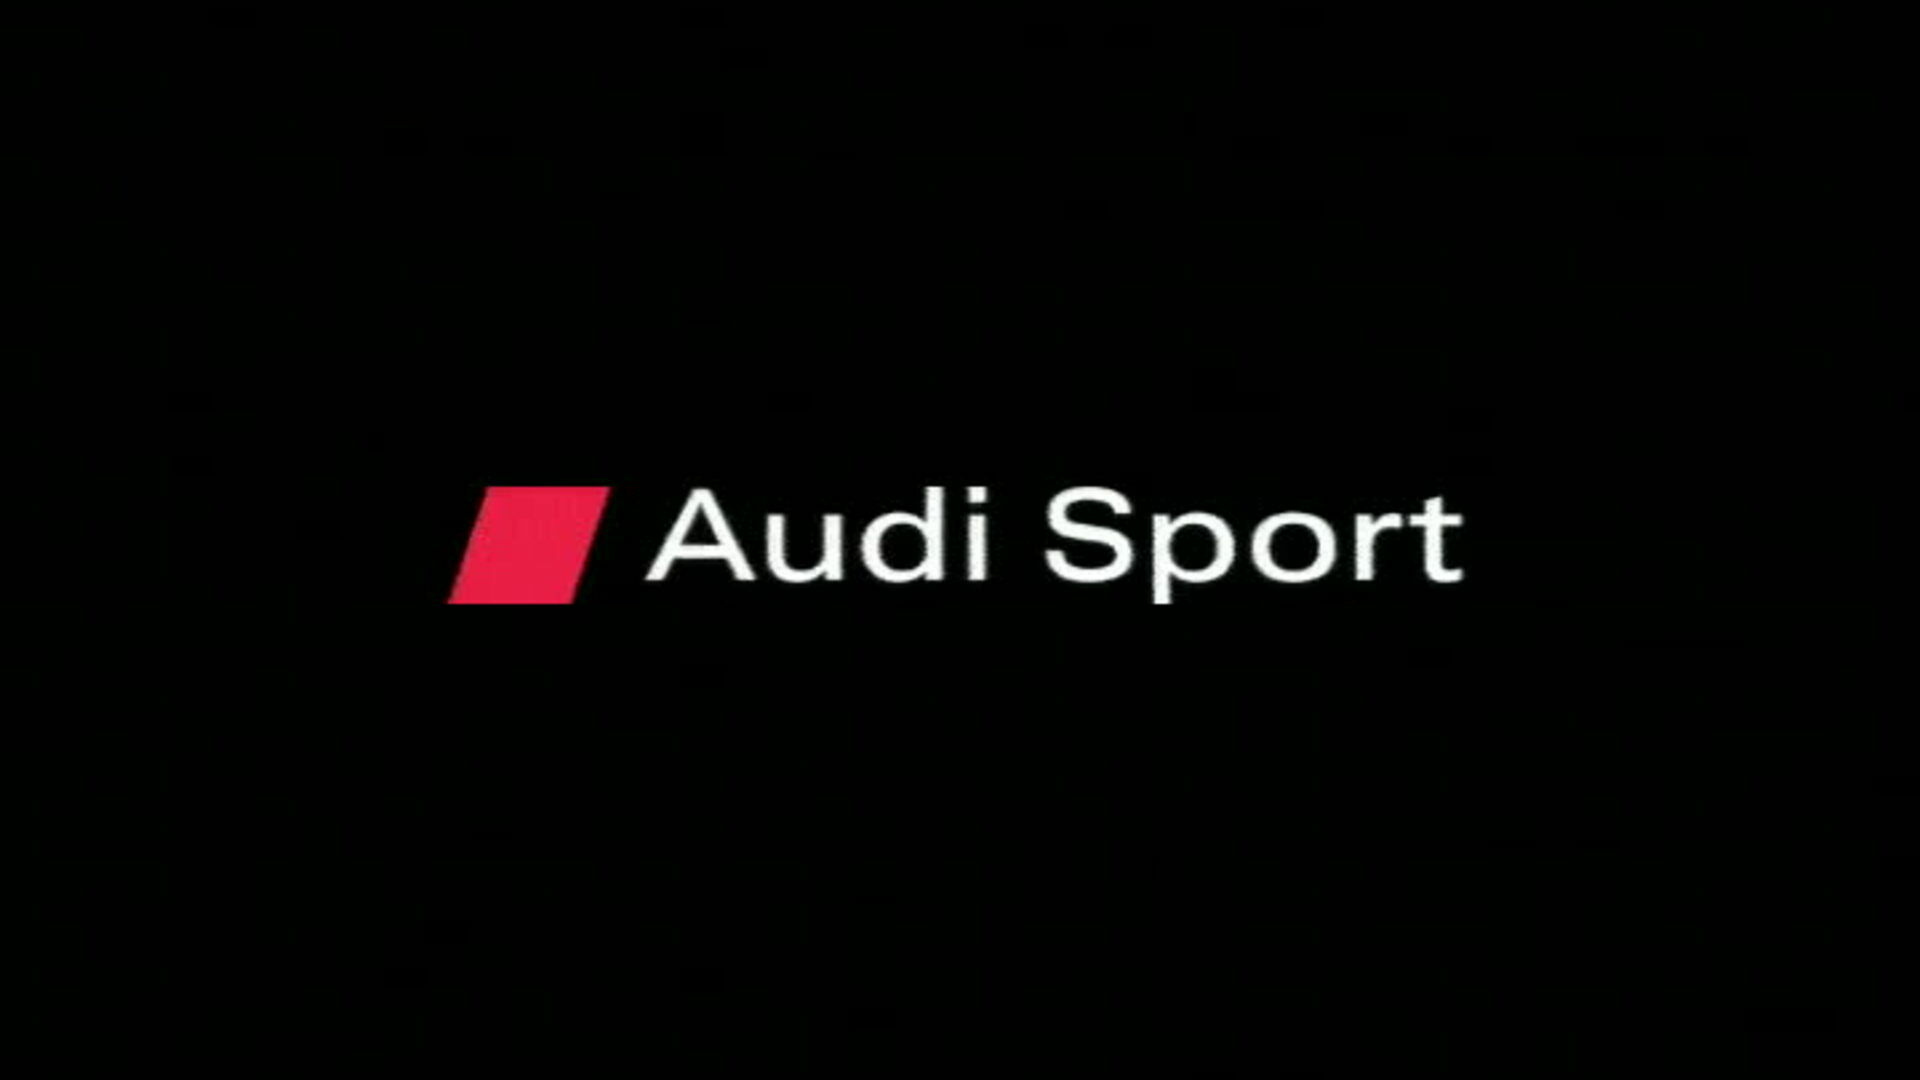 Audi R10 TDI – Development and Roll-Outs